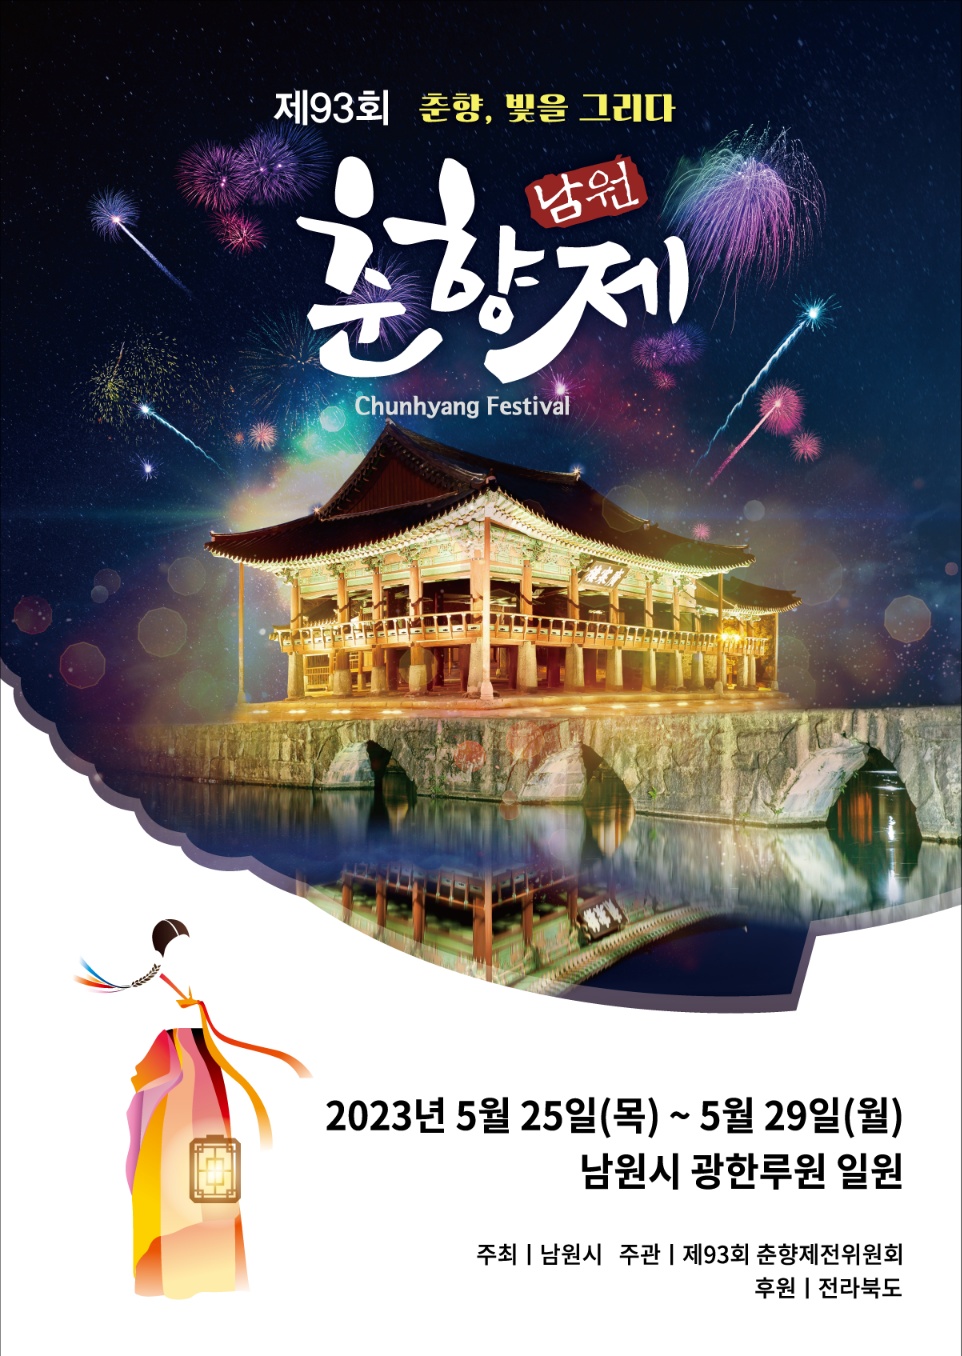 the 93rd Chunhyang Festival 썸네일